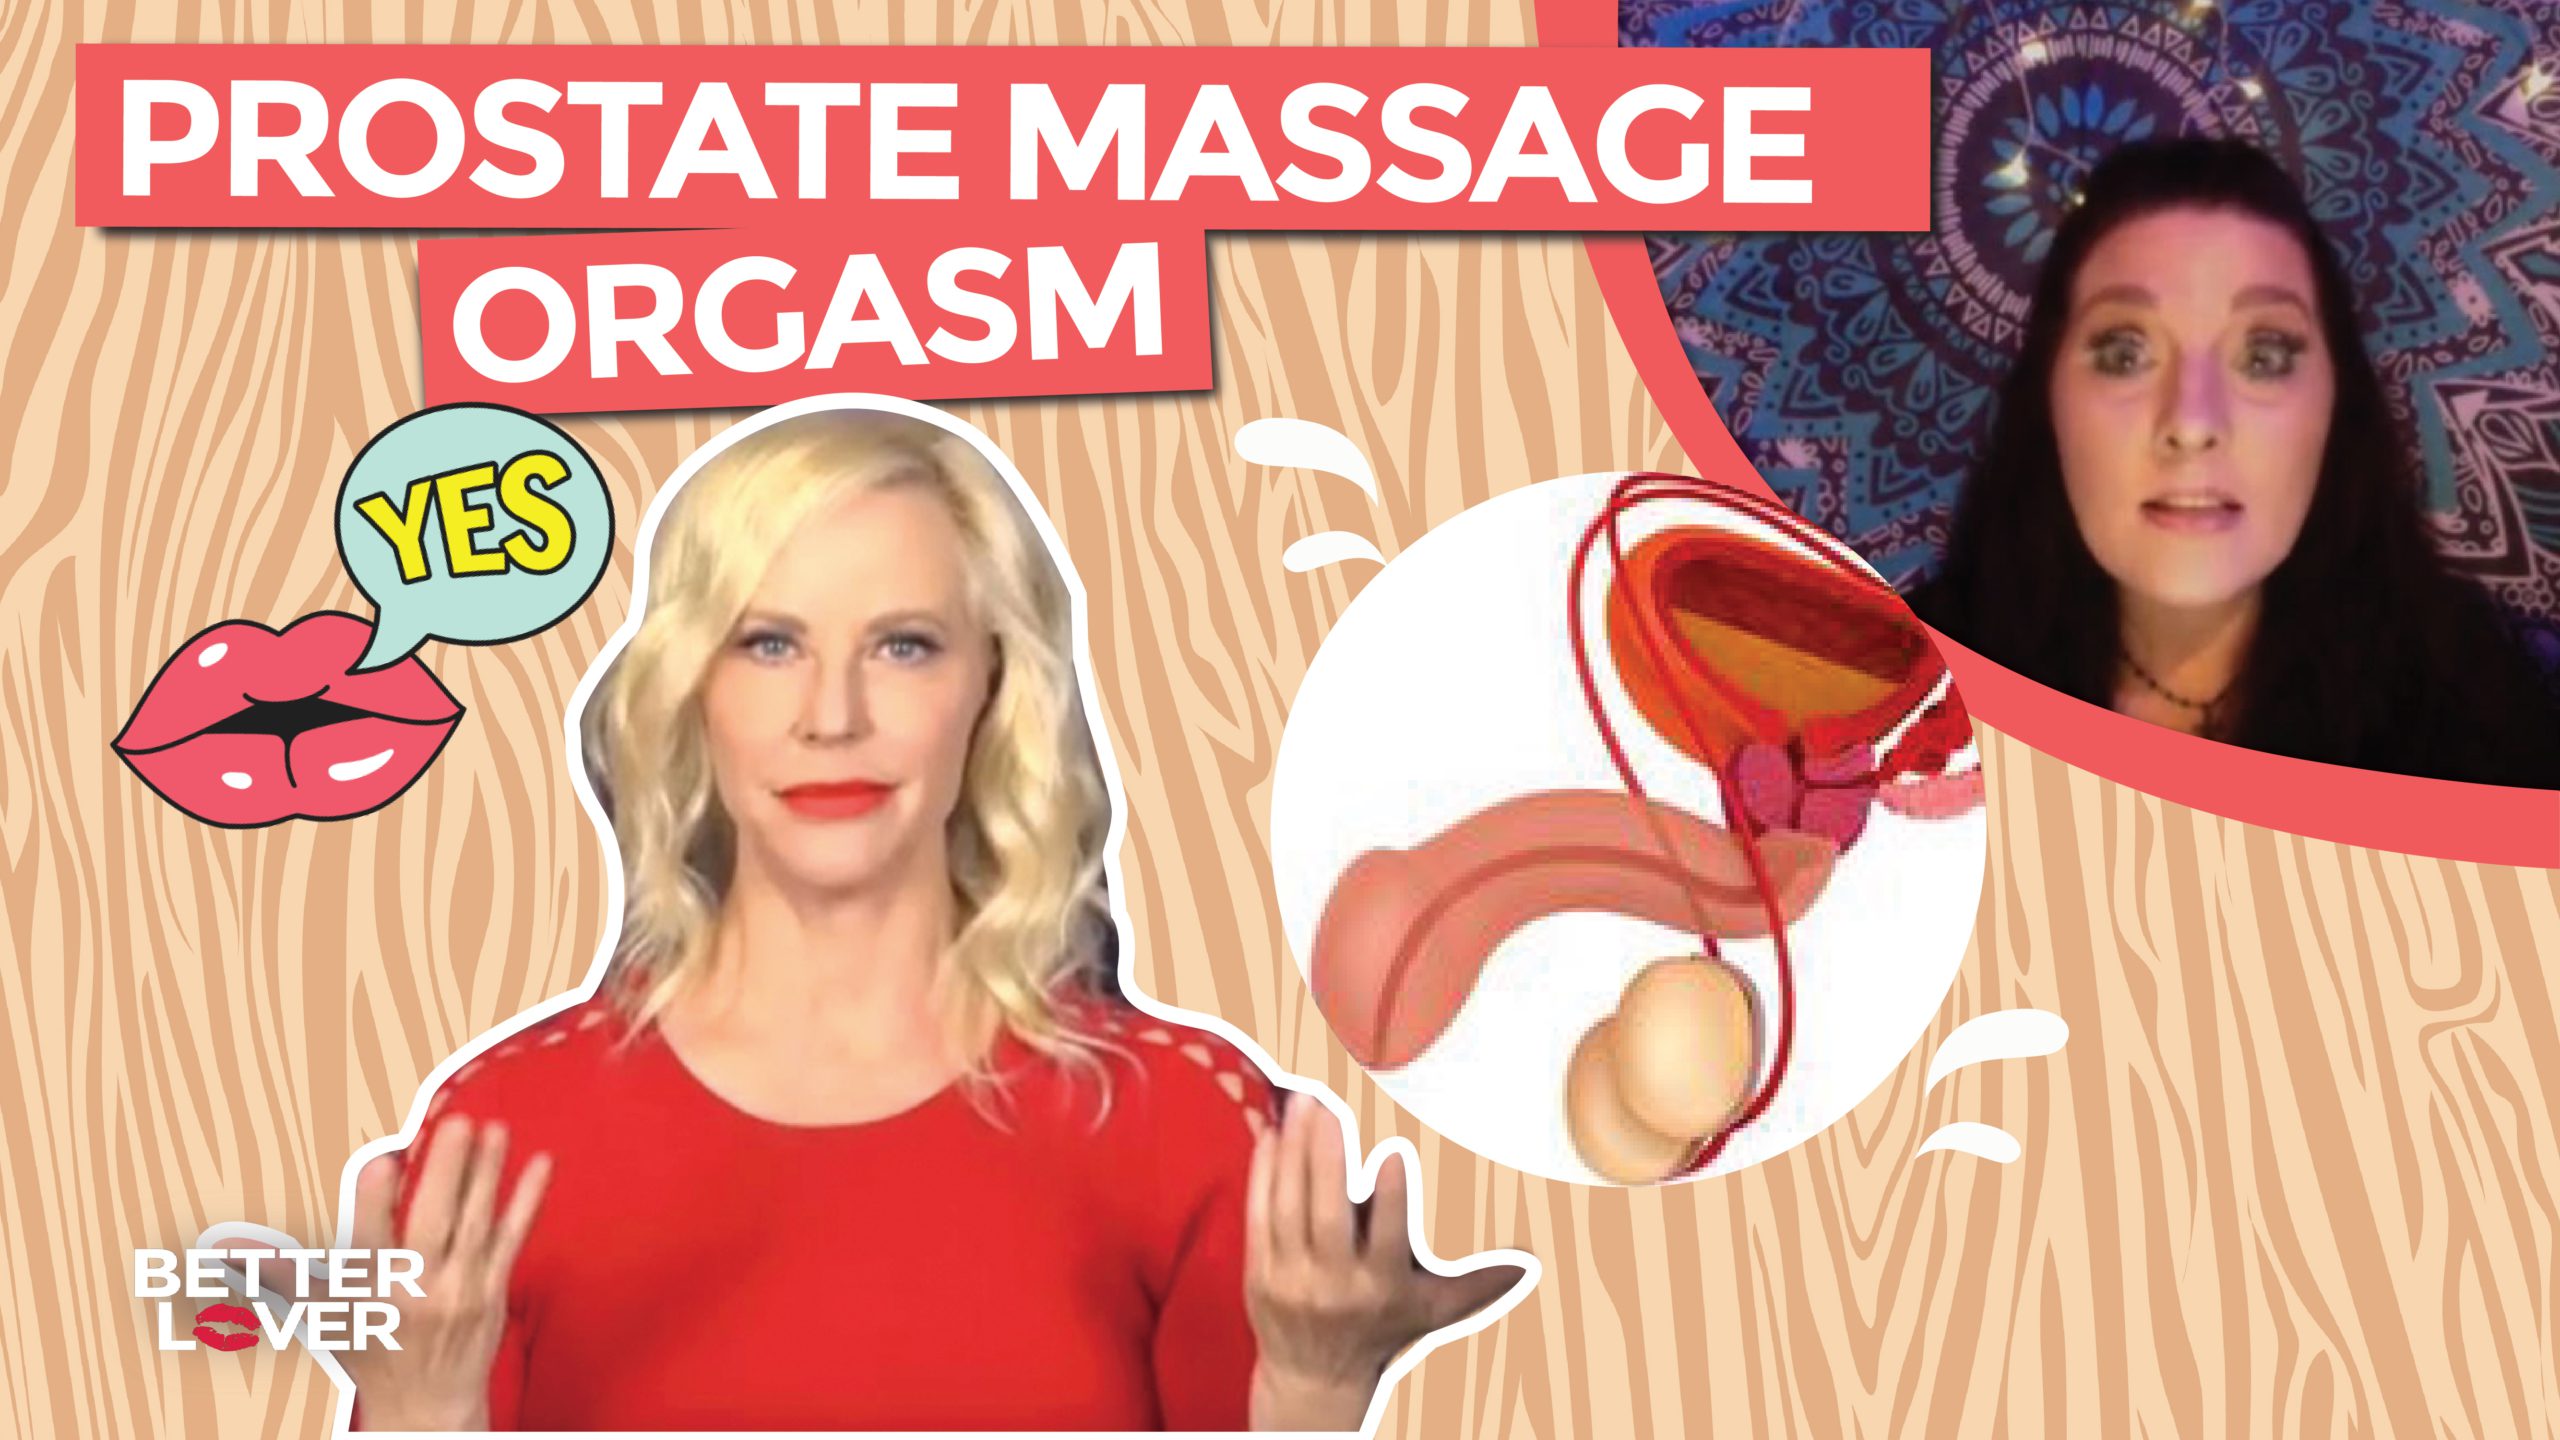 Prostate Massage, Prostate Orgasm, and The P-Spot image